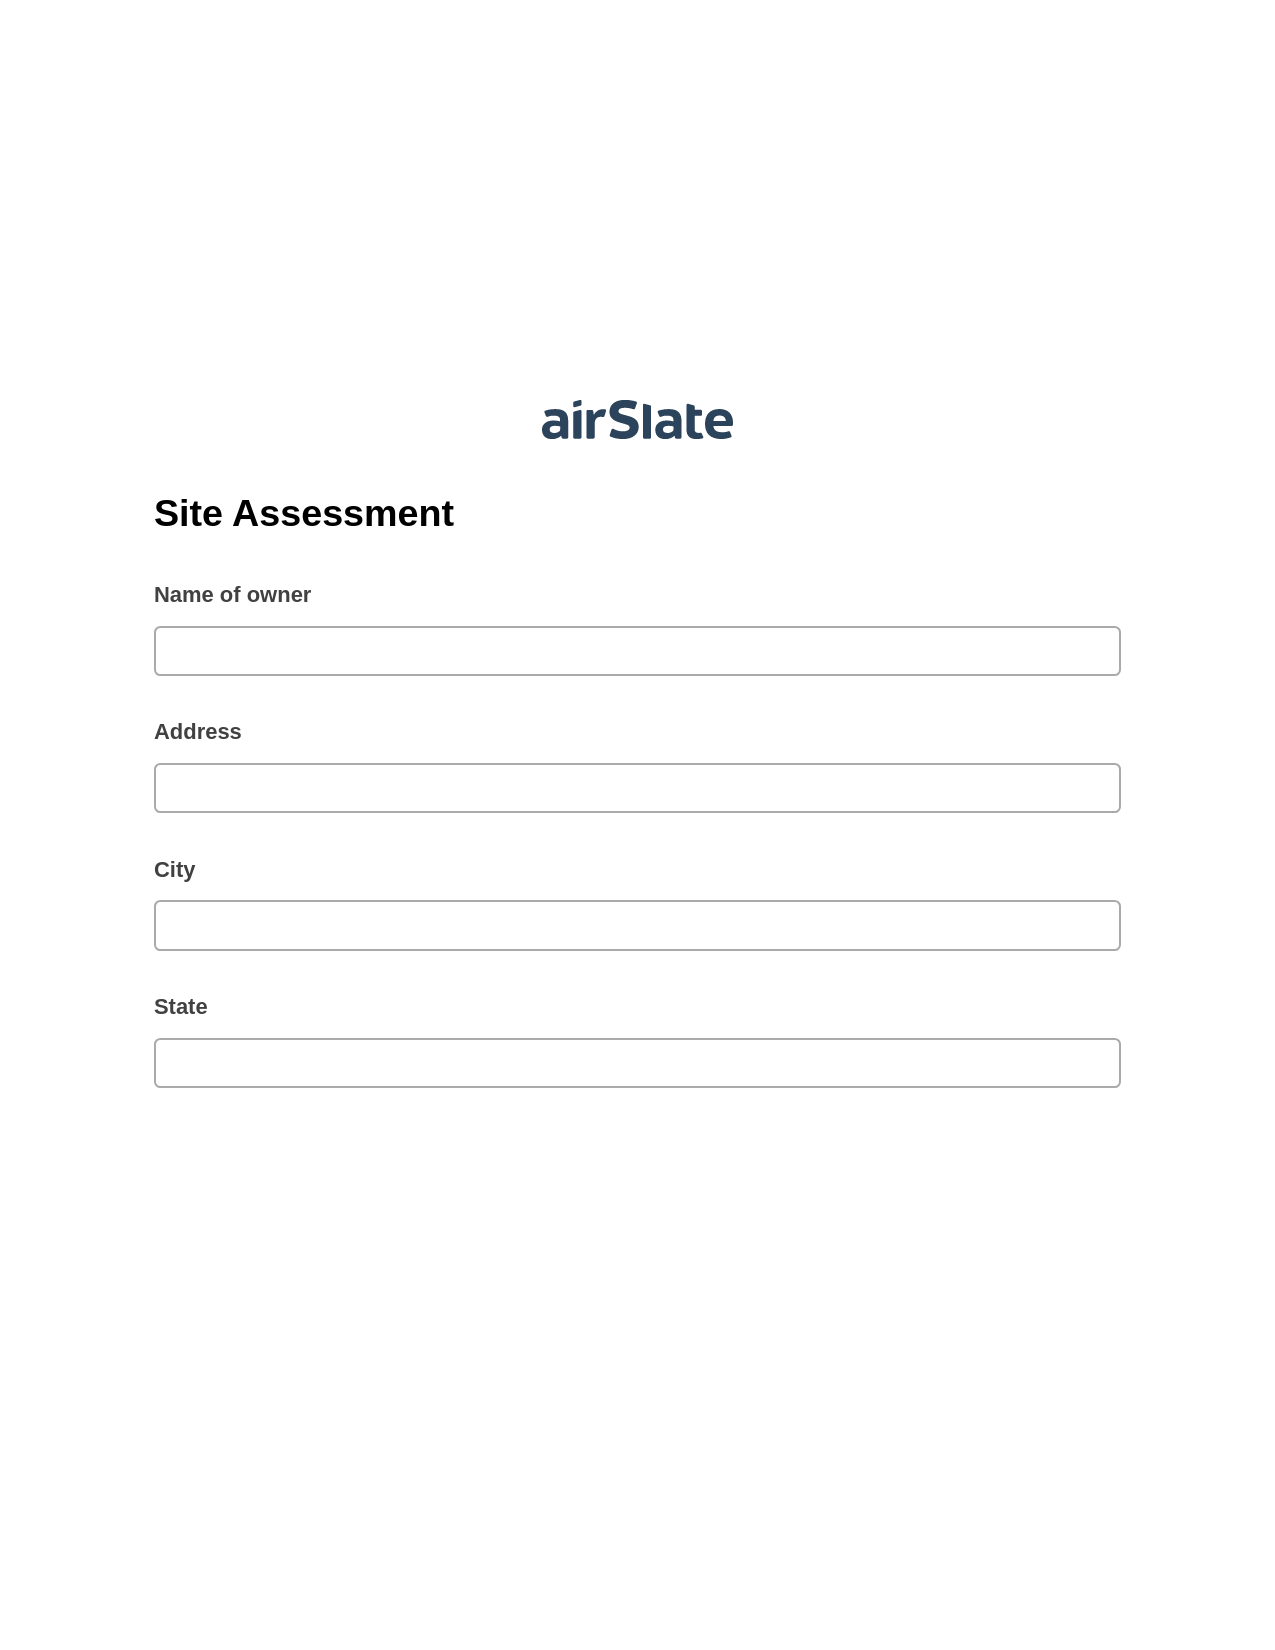 Site Assessment Pre-fill from Salesforce Record Bot, Update NetSuite Records Bot, Export to Excel 365 Bot